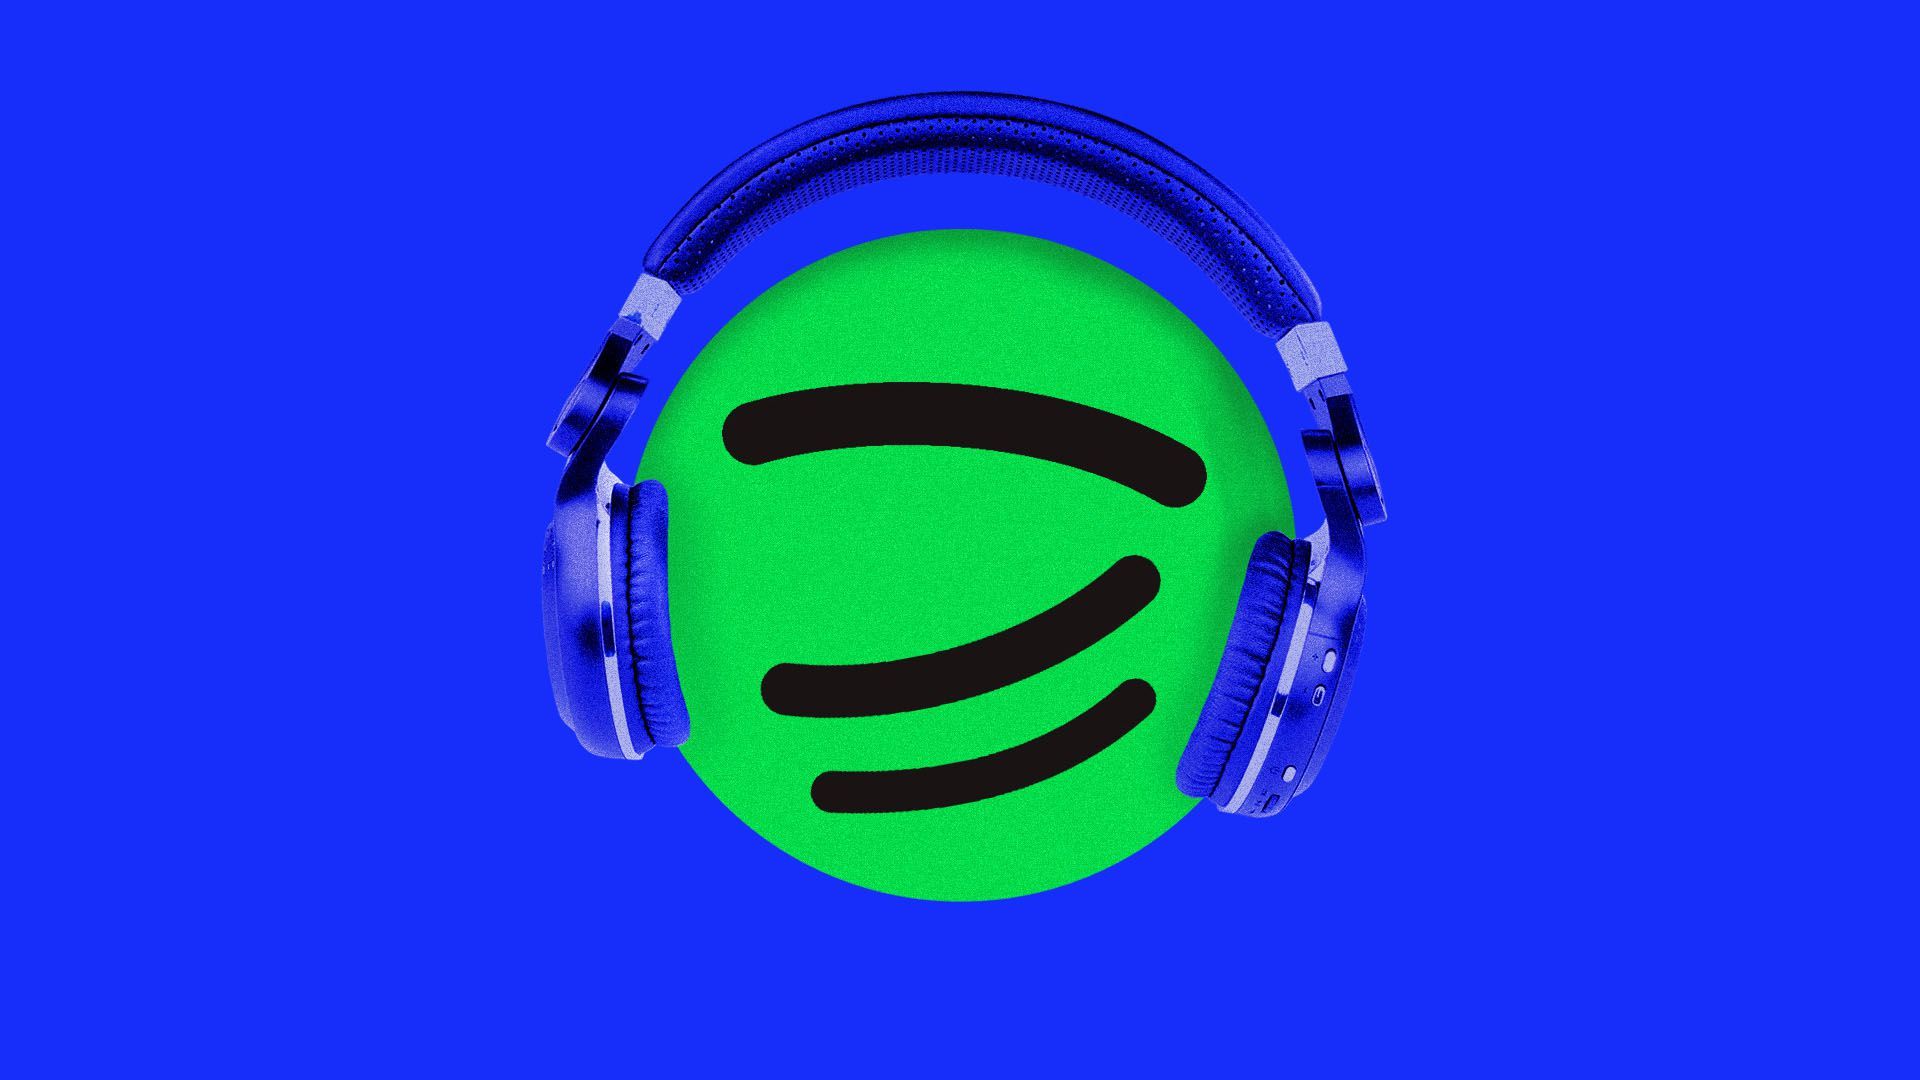 Illustration of podcast symbol with headphones on and smiling